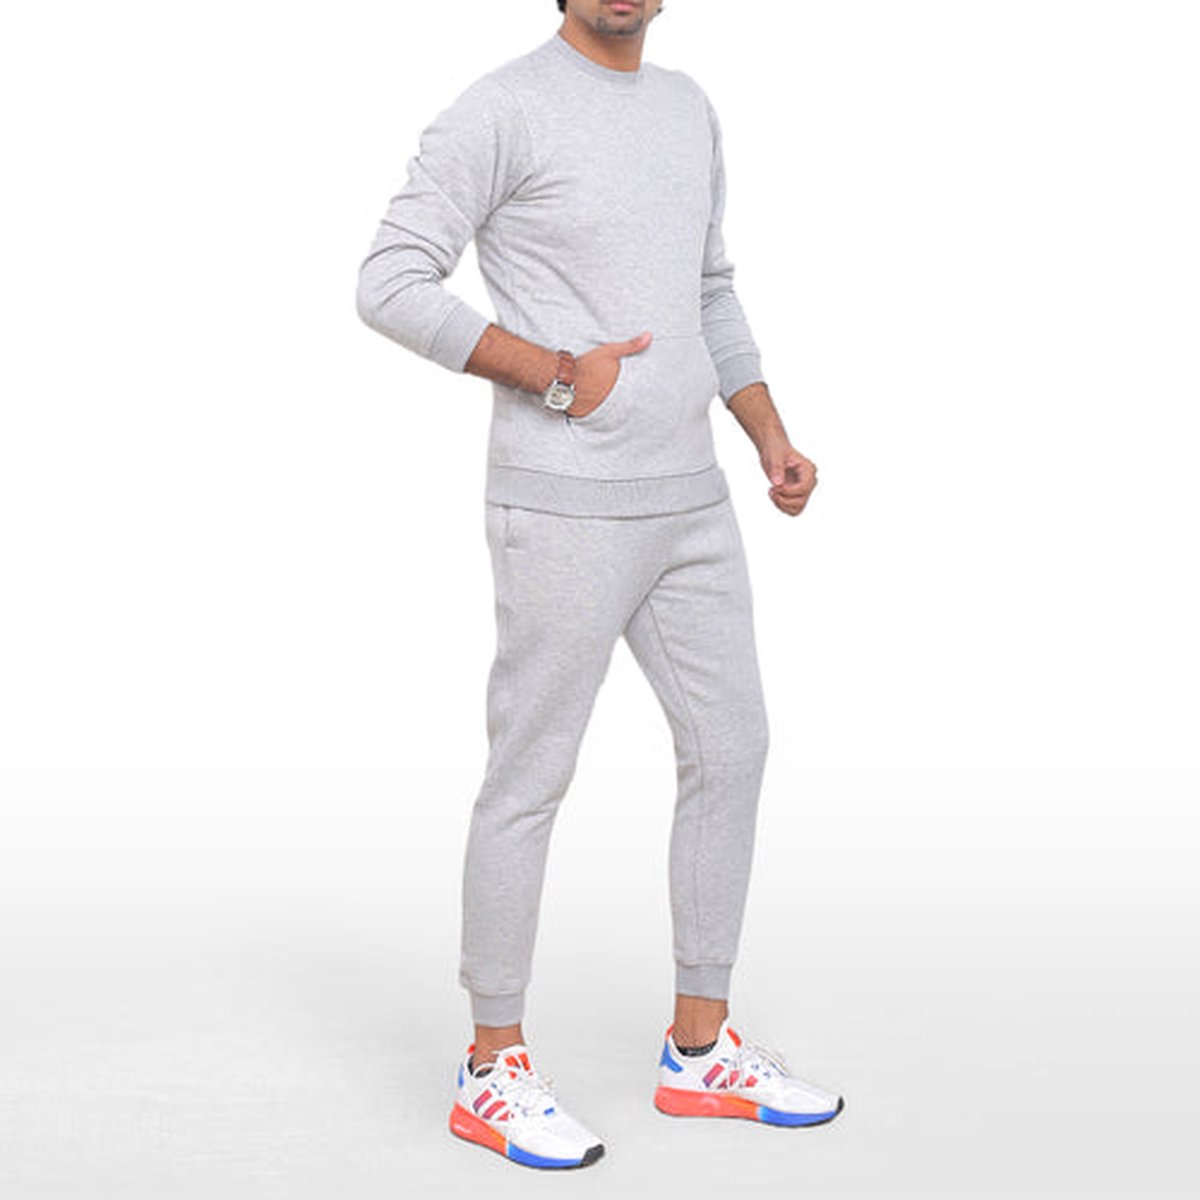 ICONICX Mens Plain Tracksuit Fleece Pullover Sweatshirt with Trousers Cotton Jogging Suit Exercise, Fitness, Boxing MMA, Grey